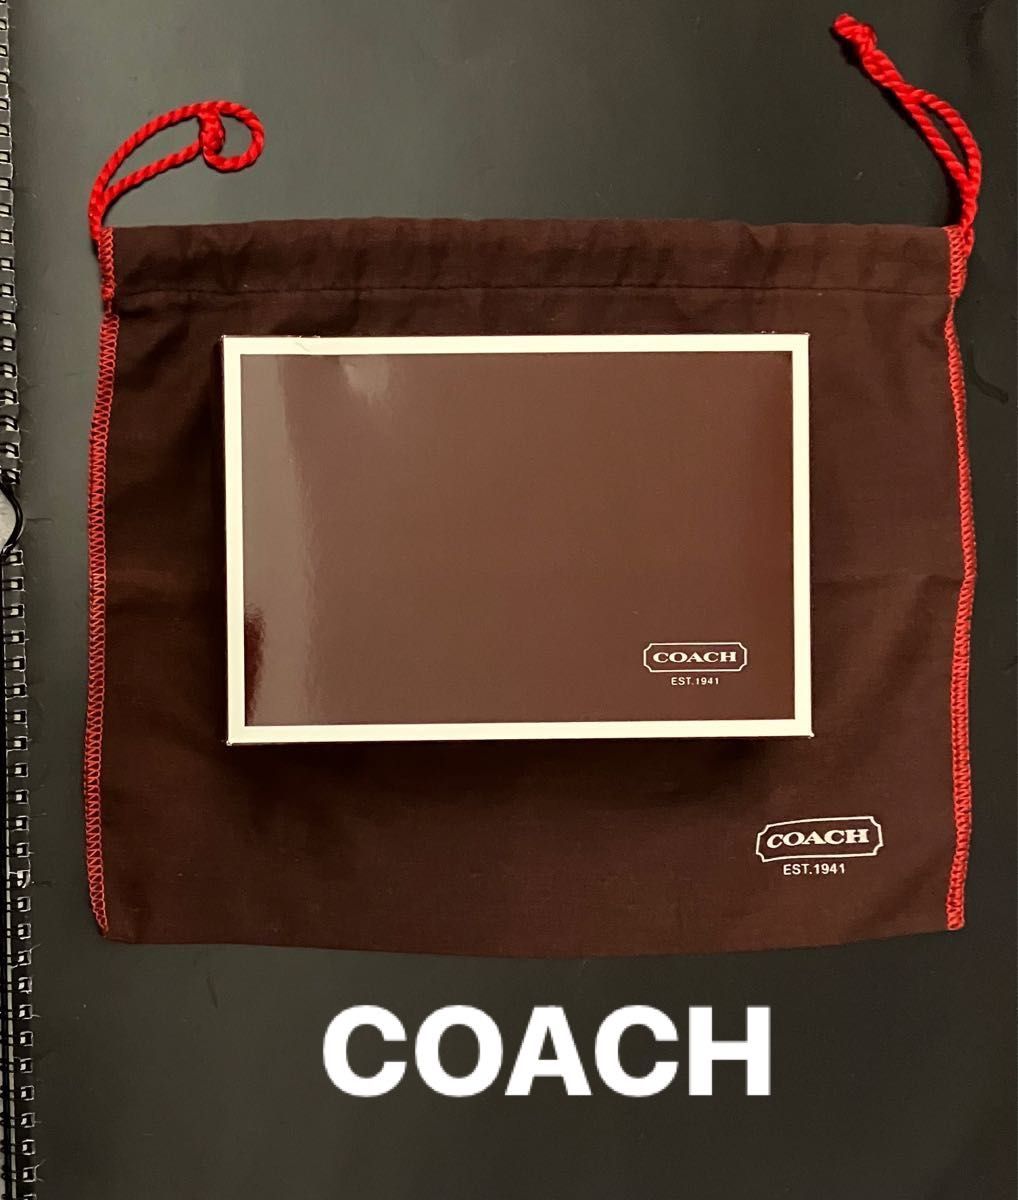 COACH 箱と 巾着 コーチ 空箱 ギフト ラッピング｜PayPayフリマ